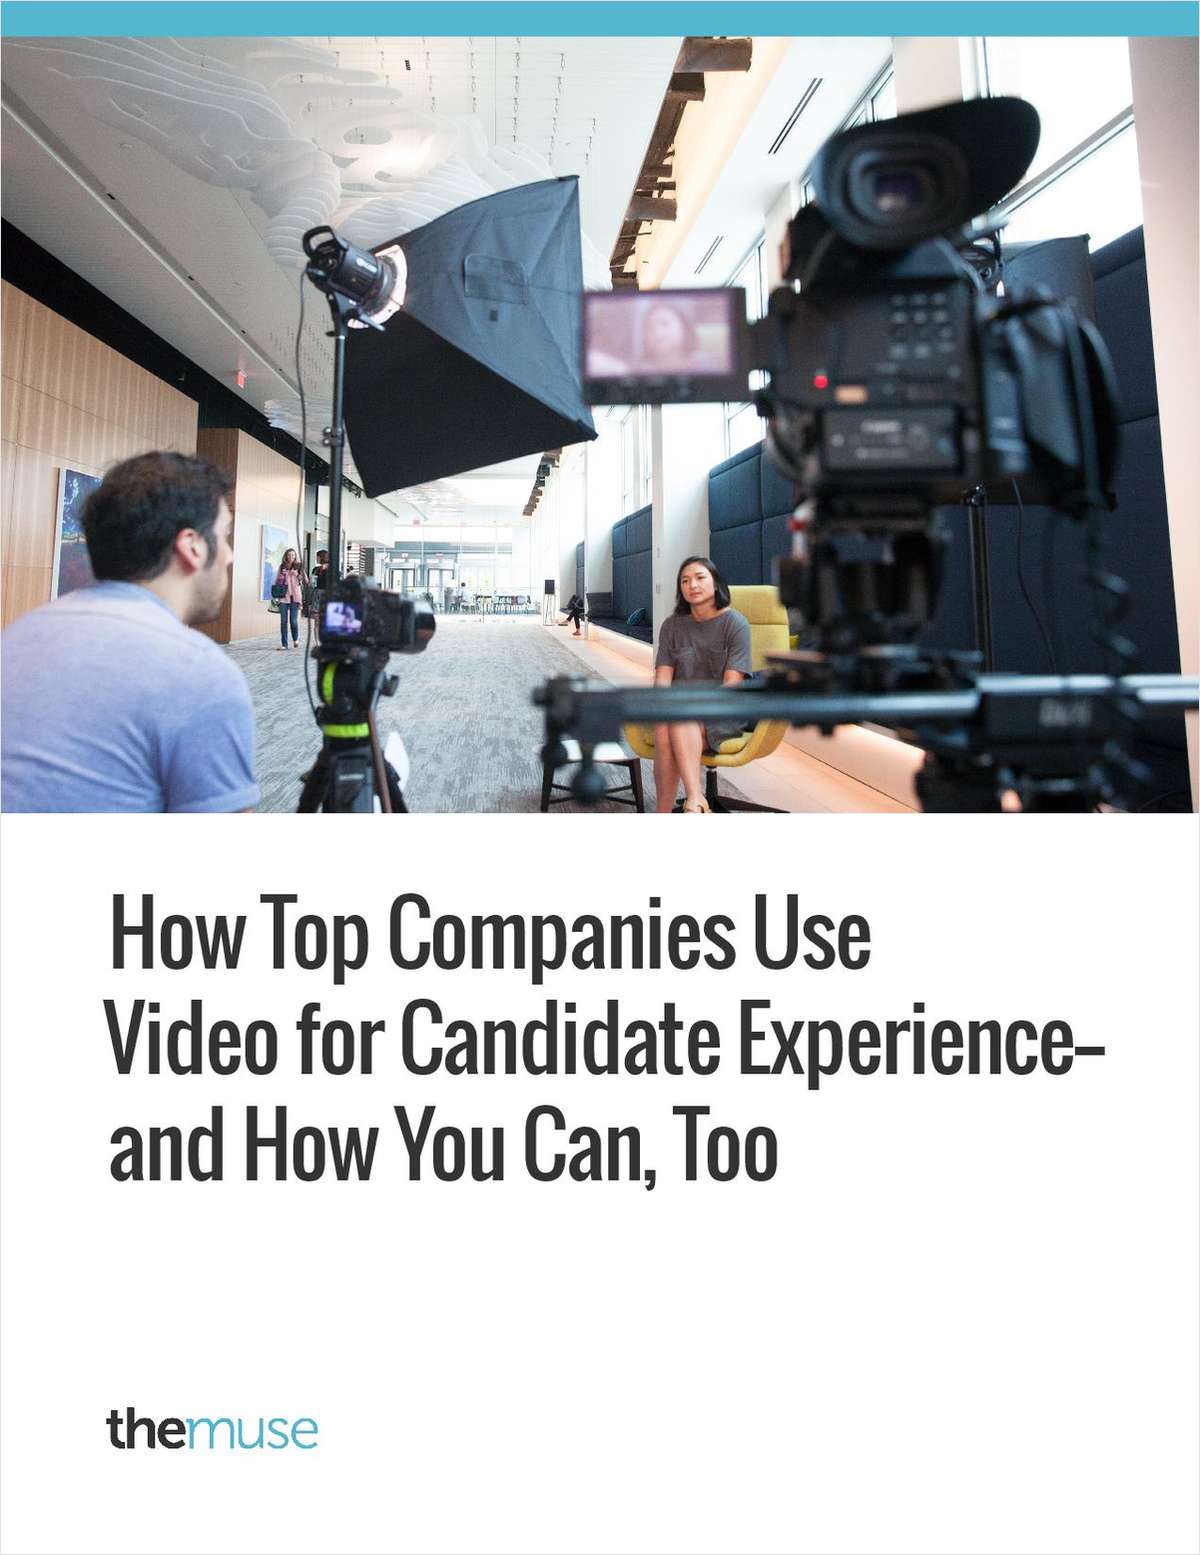 How Top Companies Use Video for Candidate Experience- And How You Can, Too